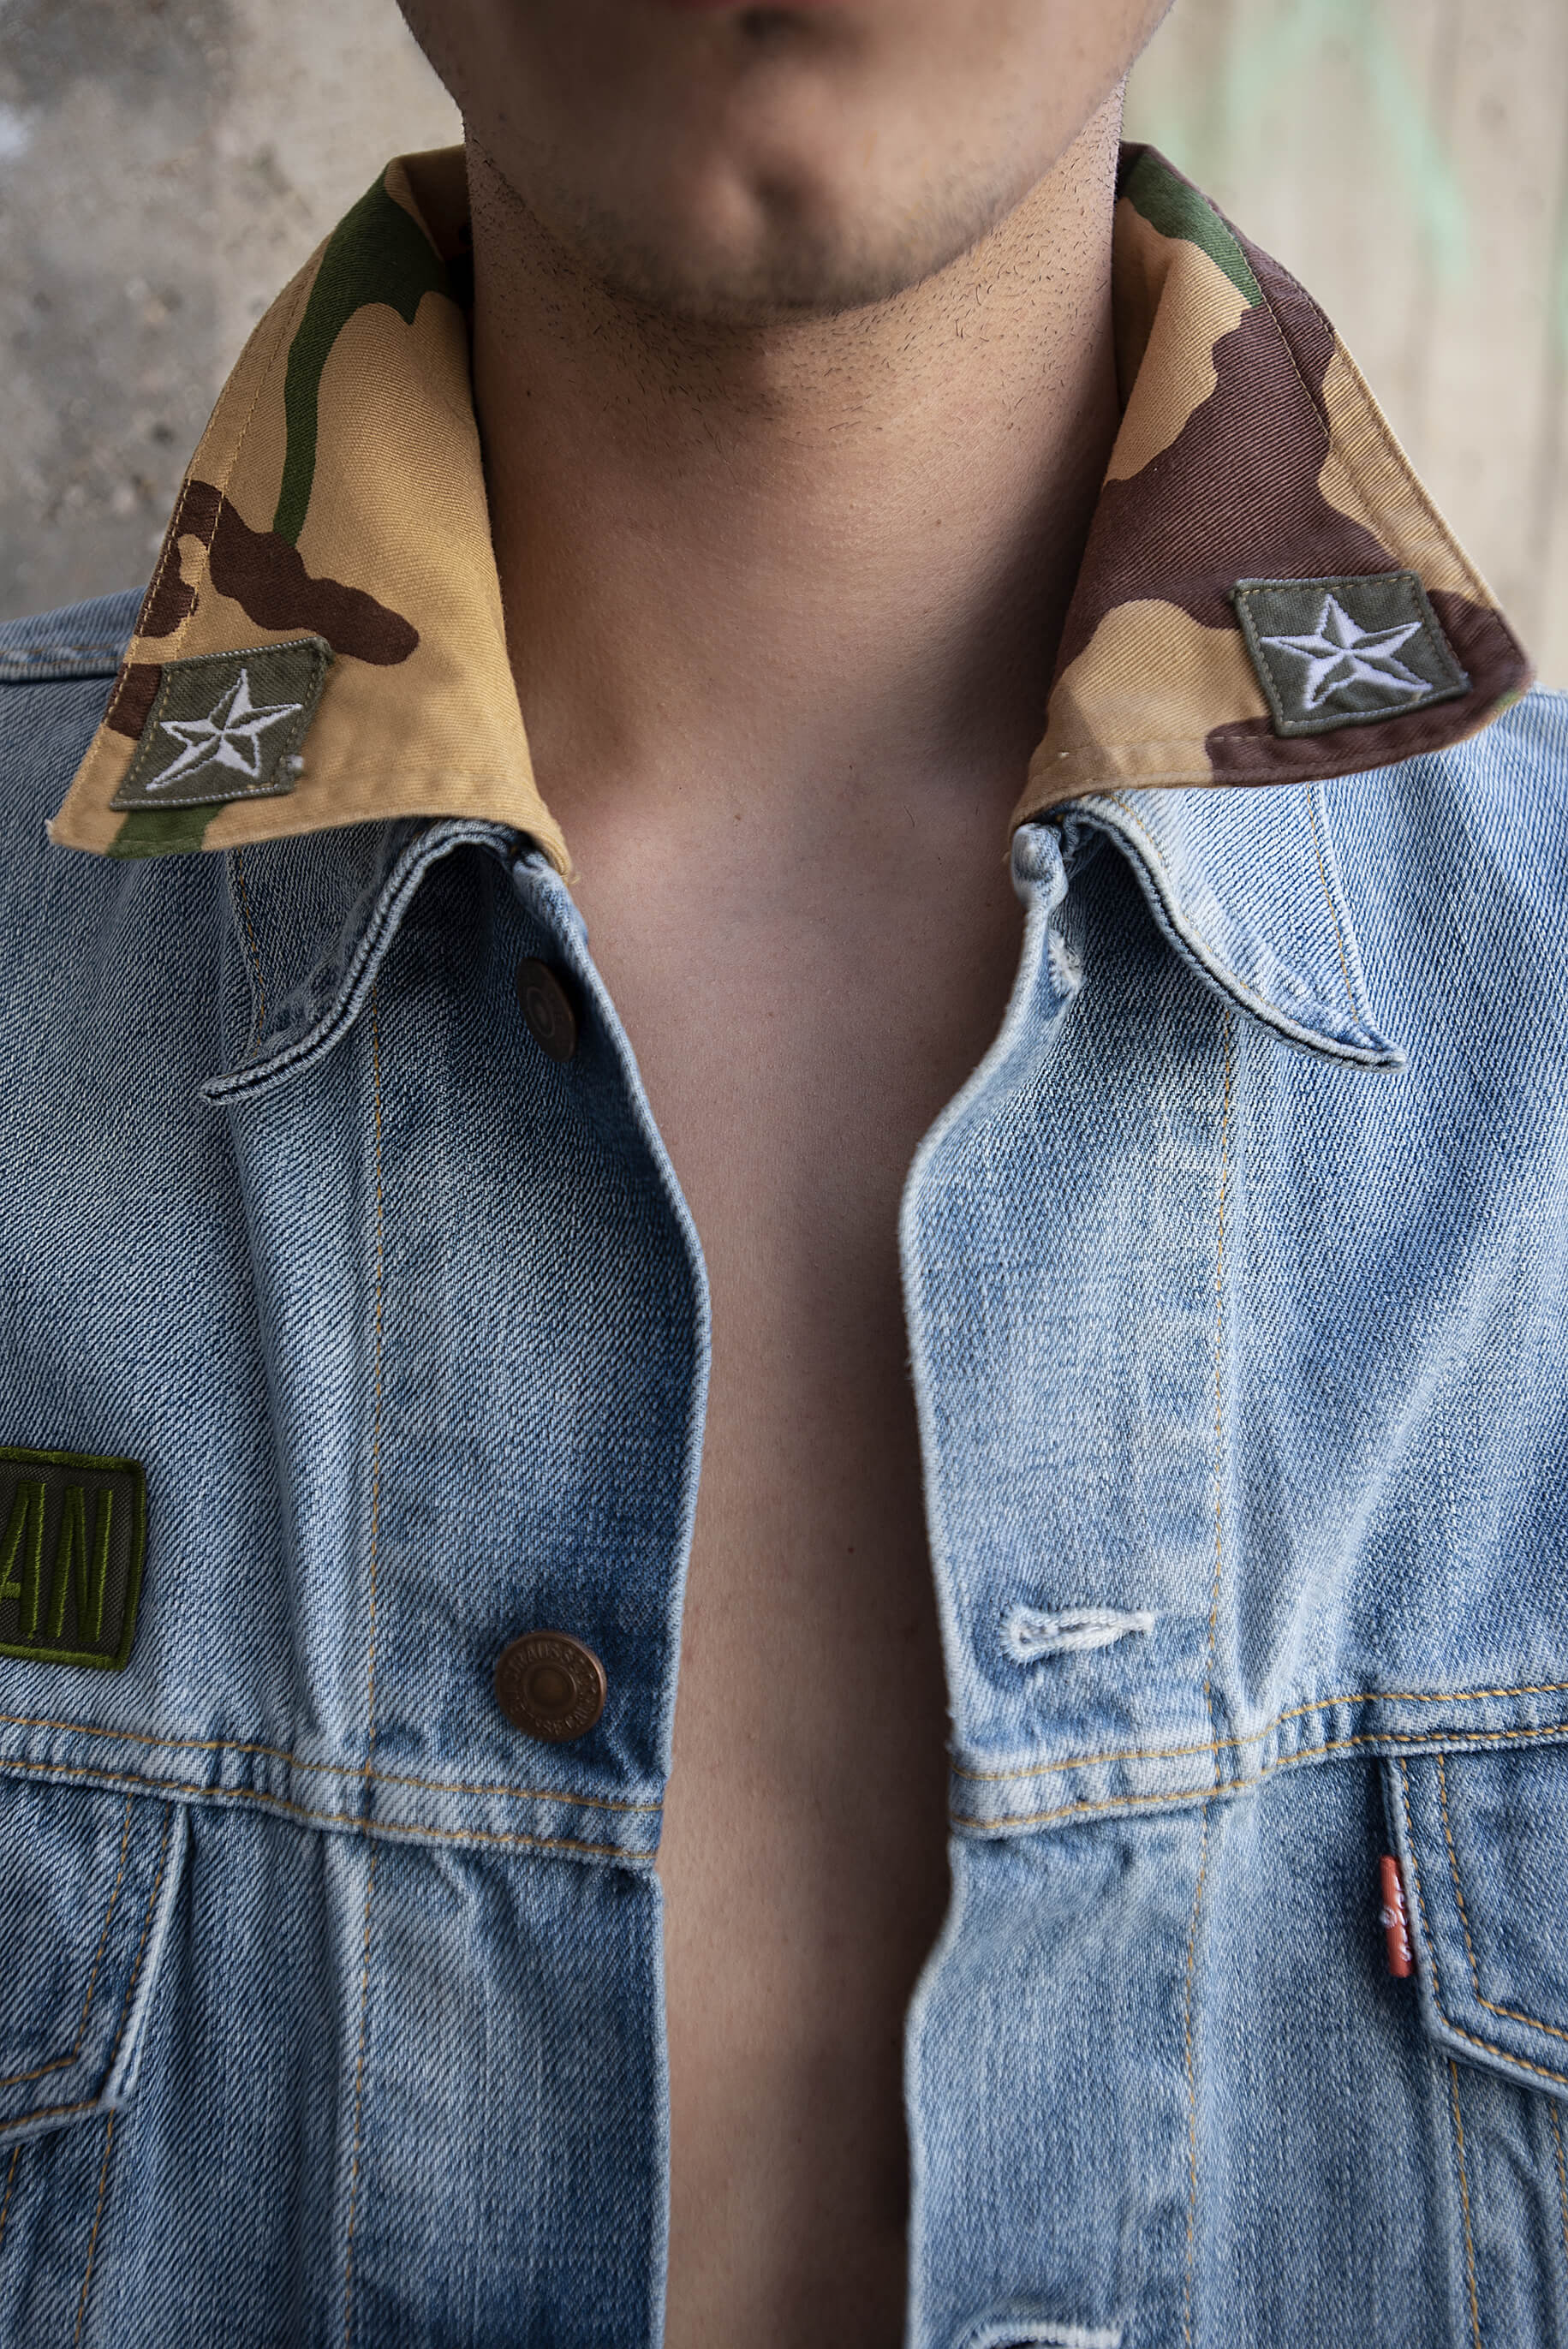 ➽ FORT WAYNE - Levi's oversized jeans jacket + military jacket: vintage  clothes for men and women revisited in upcycling, slow fashion brand, niche  clothing brand 